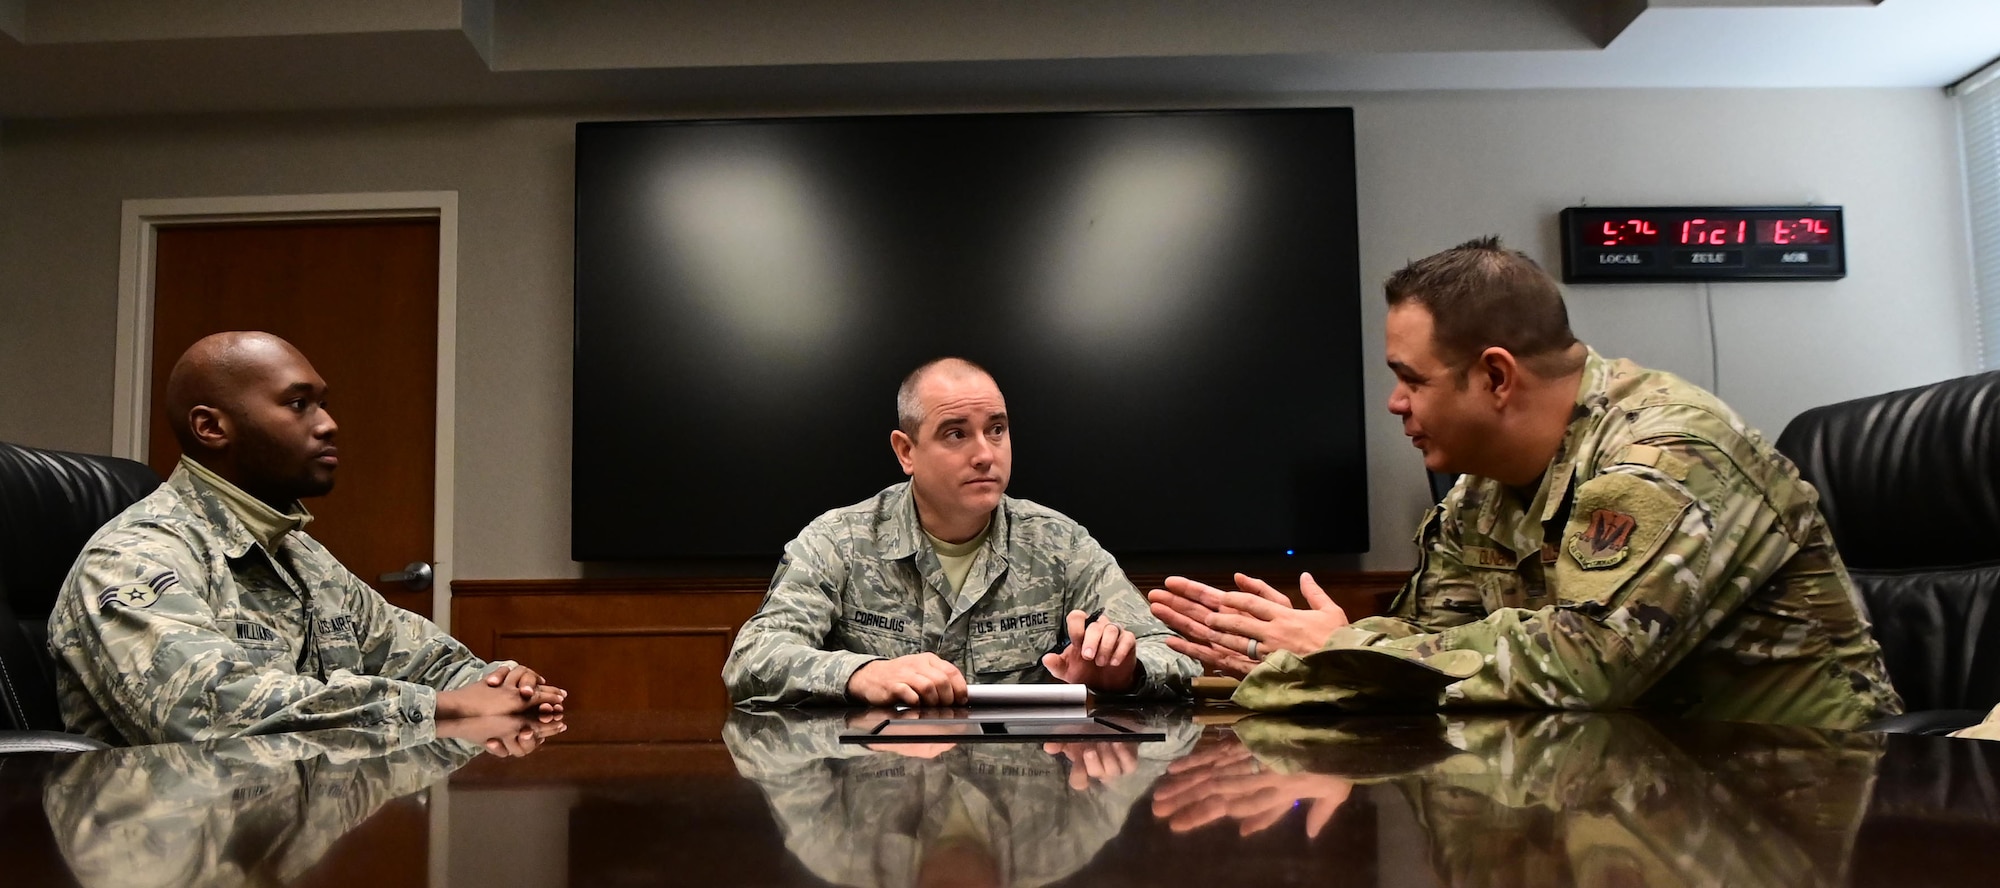 U.S. Air Force Master Sgt. Jeremy Cornelius, center, 118th Wing public affairs superintendent, Tennessee Air National Guard, facilitates a small group discussion with Maj. Robert Dunbar, right, and Airman 1st Class Willie Williams, left, for the 118th WG's resiliency tactical pause Dec. 4, 2019 at Berry Field Air National Guard Base, Nashville, Tennessee. The discussion was part of the Air Force-wide initiative ordered by Air Force Chief of Staff Gen. David Goldfein to combat the rising numbers of suicides in the Air Force.